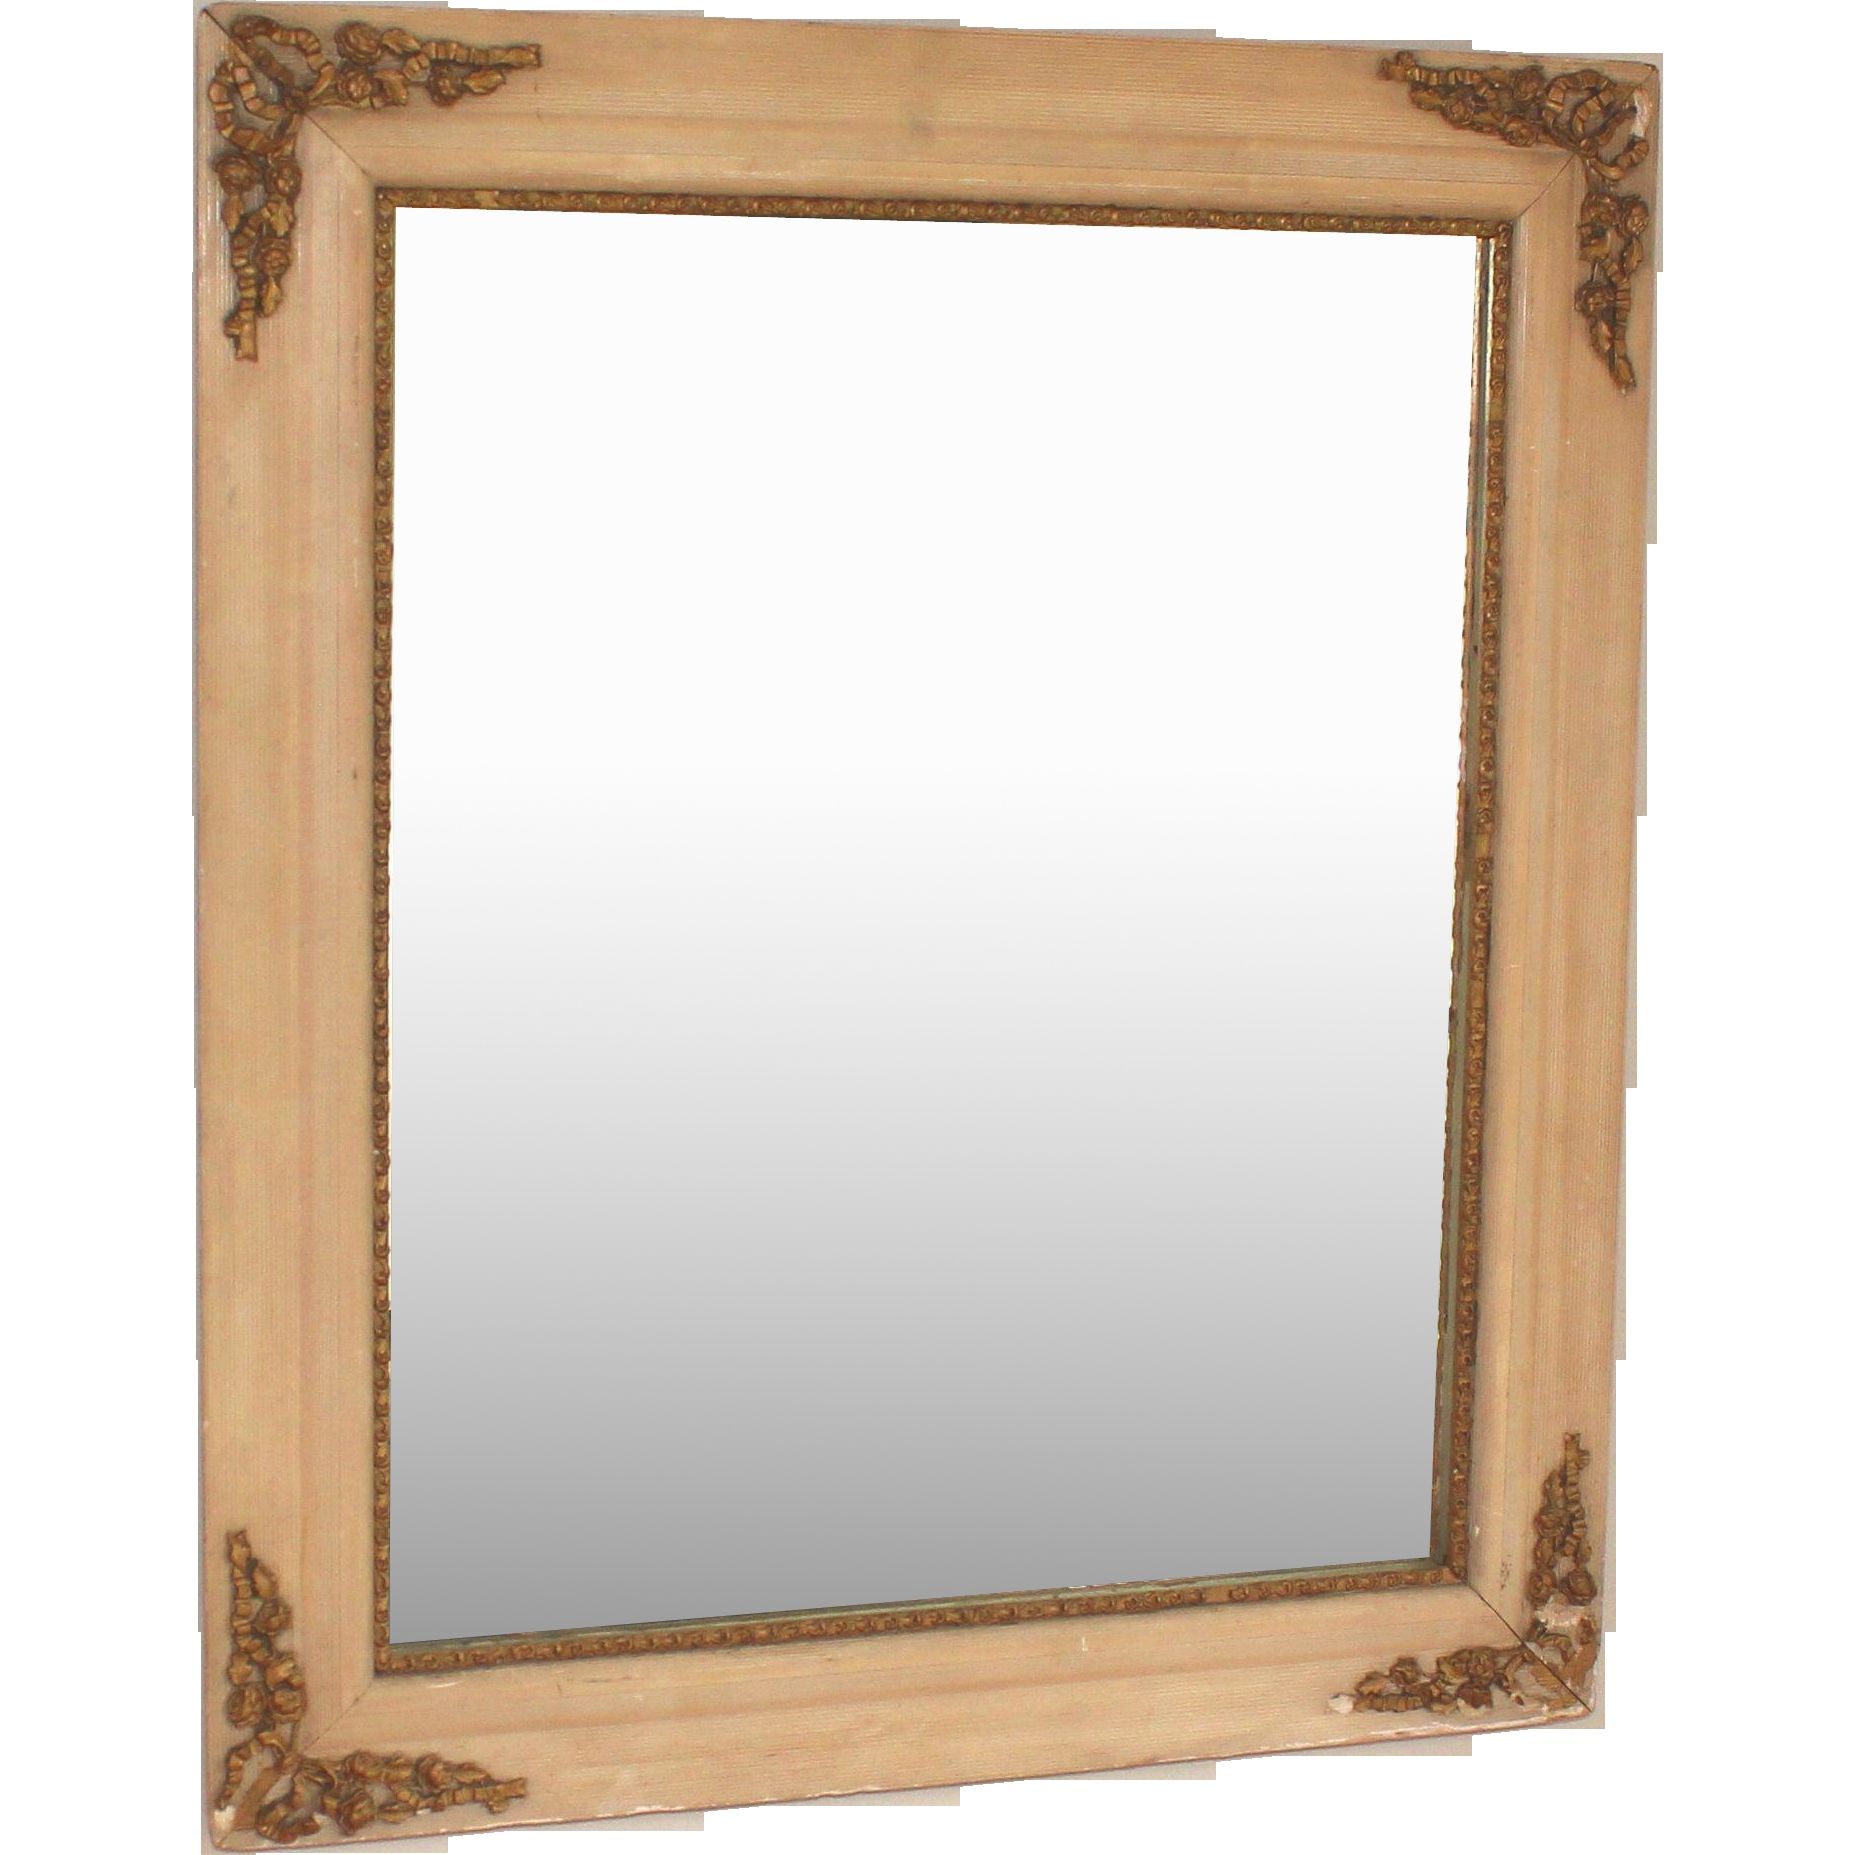 Antique French Mirror With Gold Appliques And White Wood Frame Regarding Gold French Mirror (View 11 of 15)